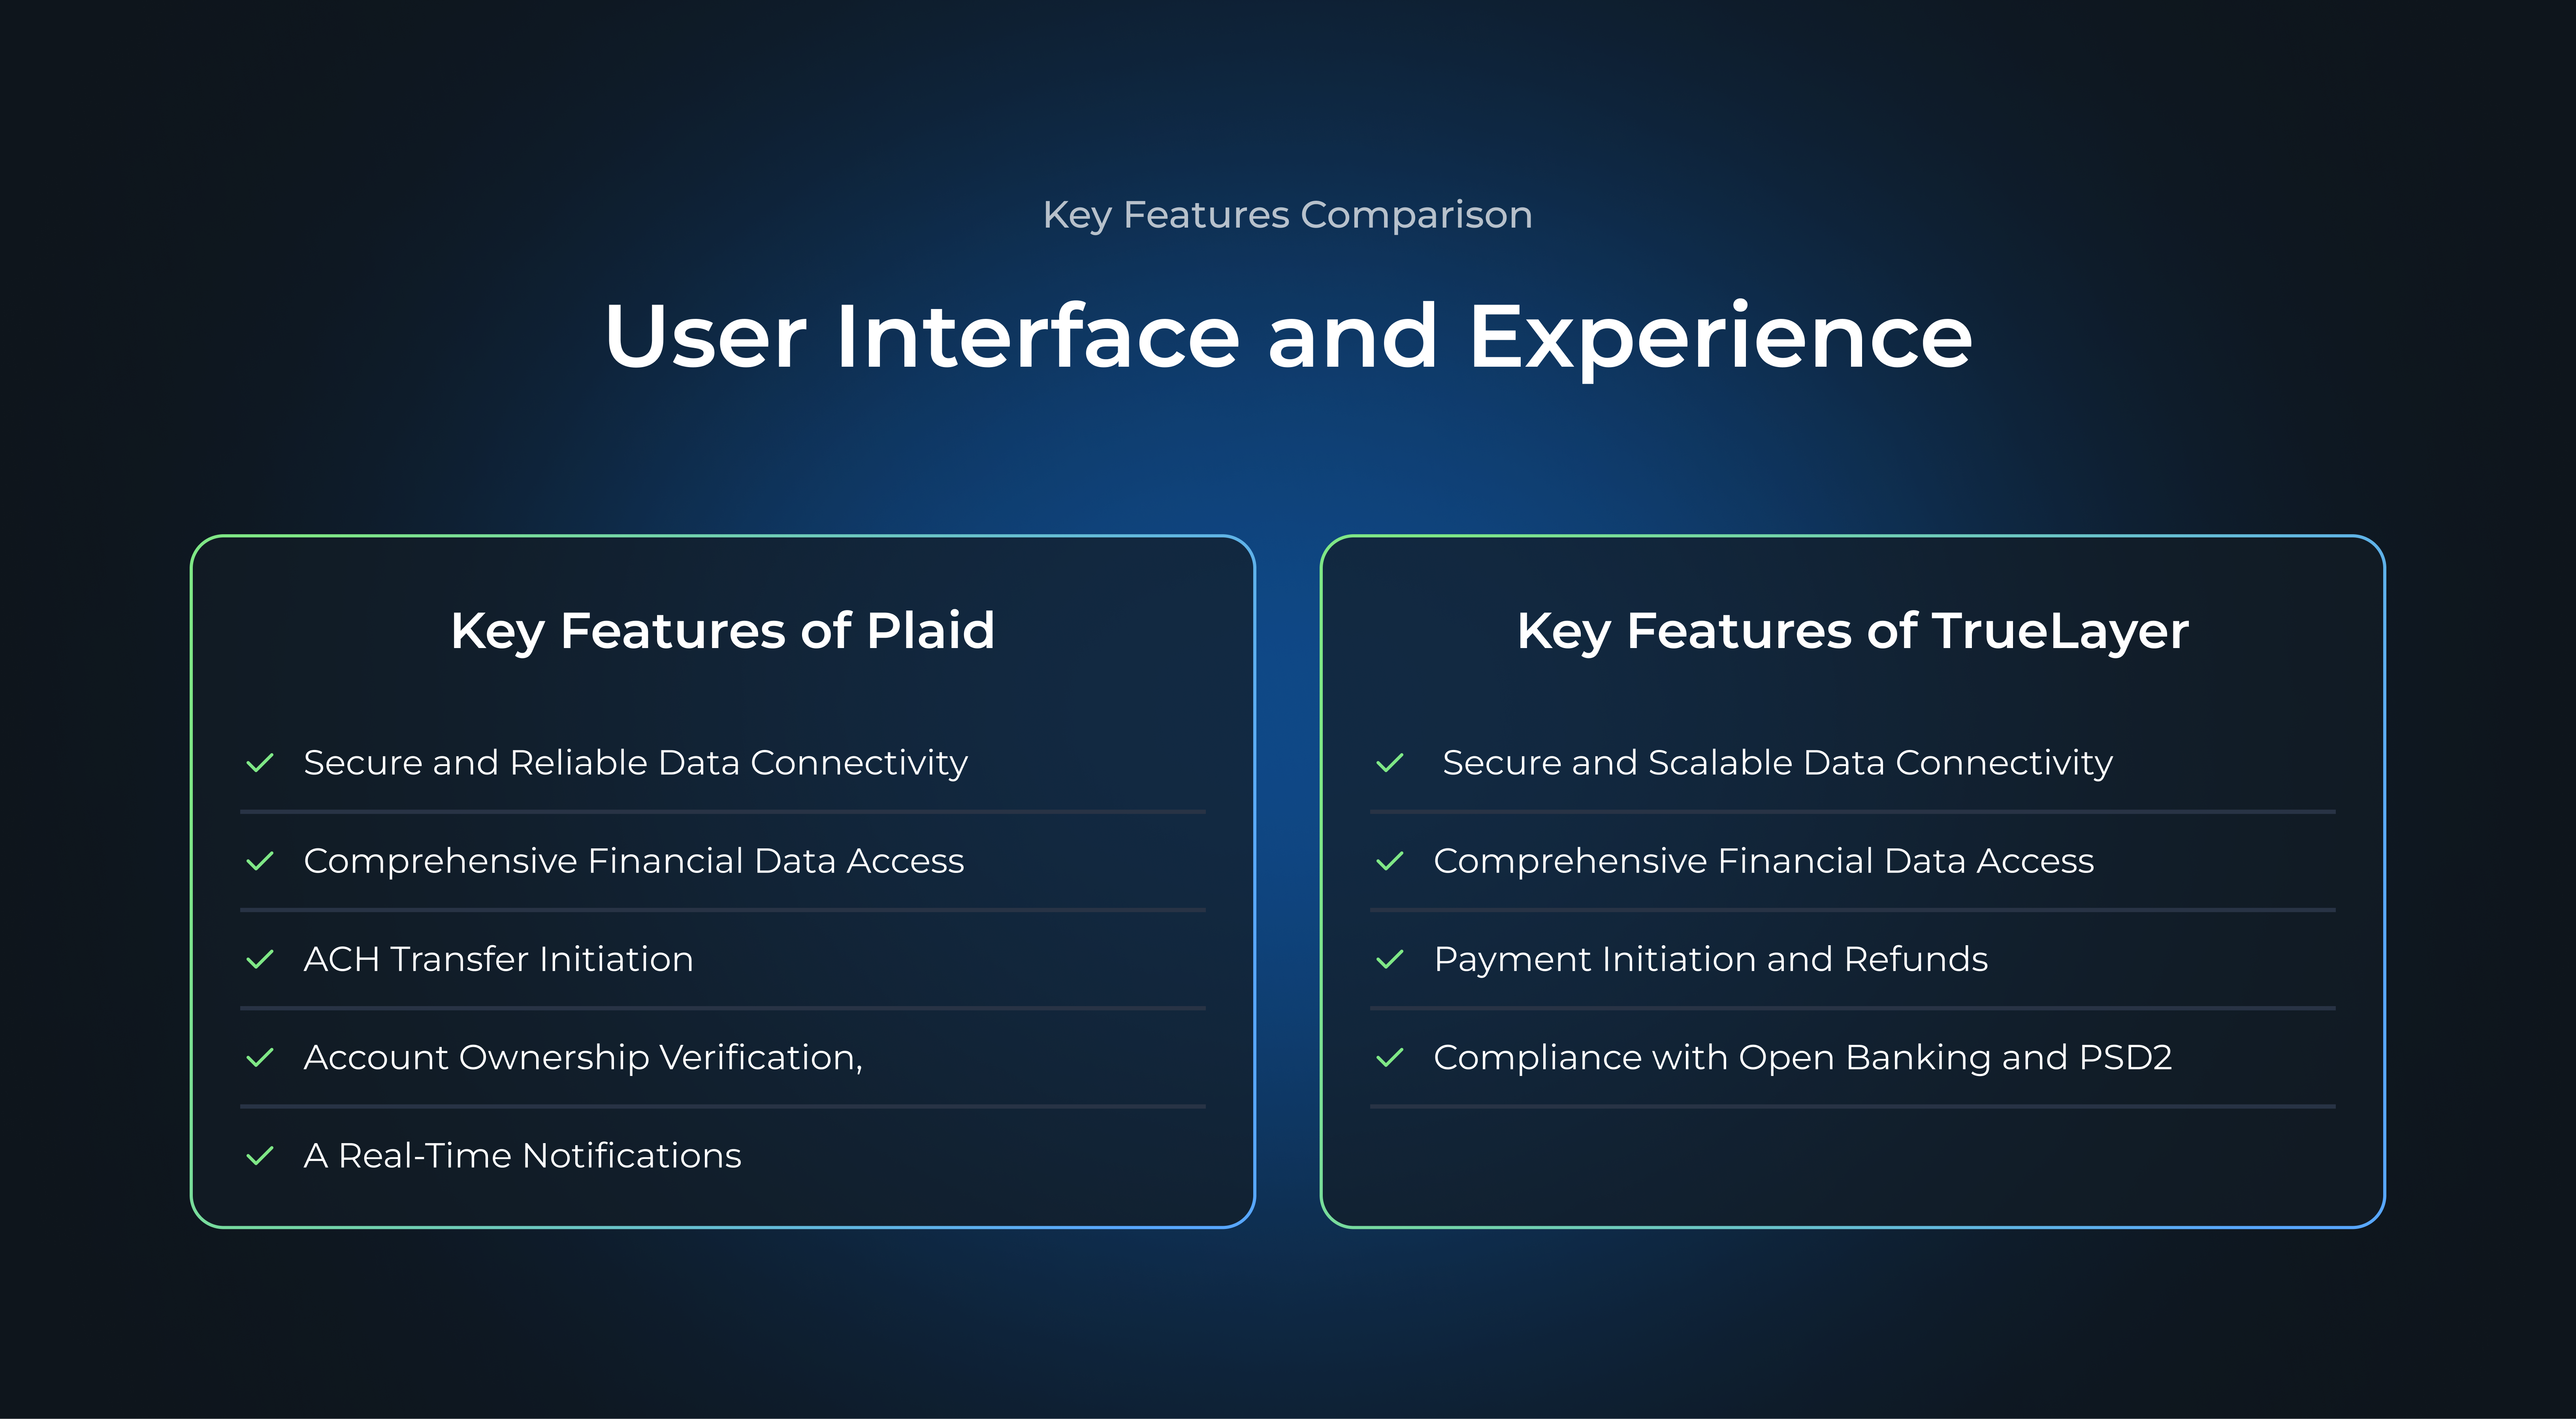 Key Features of Plaid: Secure and Reliable Data Connectivity, Comprehensive Financial Data Access, ACH Transfer Initiation, Account Ownership Verification, Real-Time Notifications 

Key Features of TrueLayer: Secure and Scalable Data Connectivity, Comprehensive Financial Data Access, Payment Initiation and Refunds, Compliance with Open Banking and PSD2
